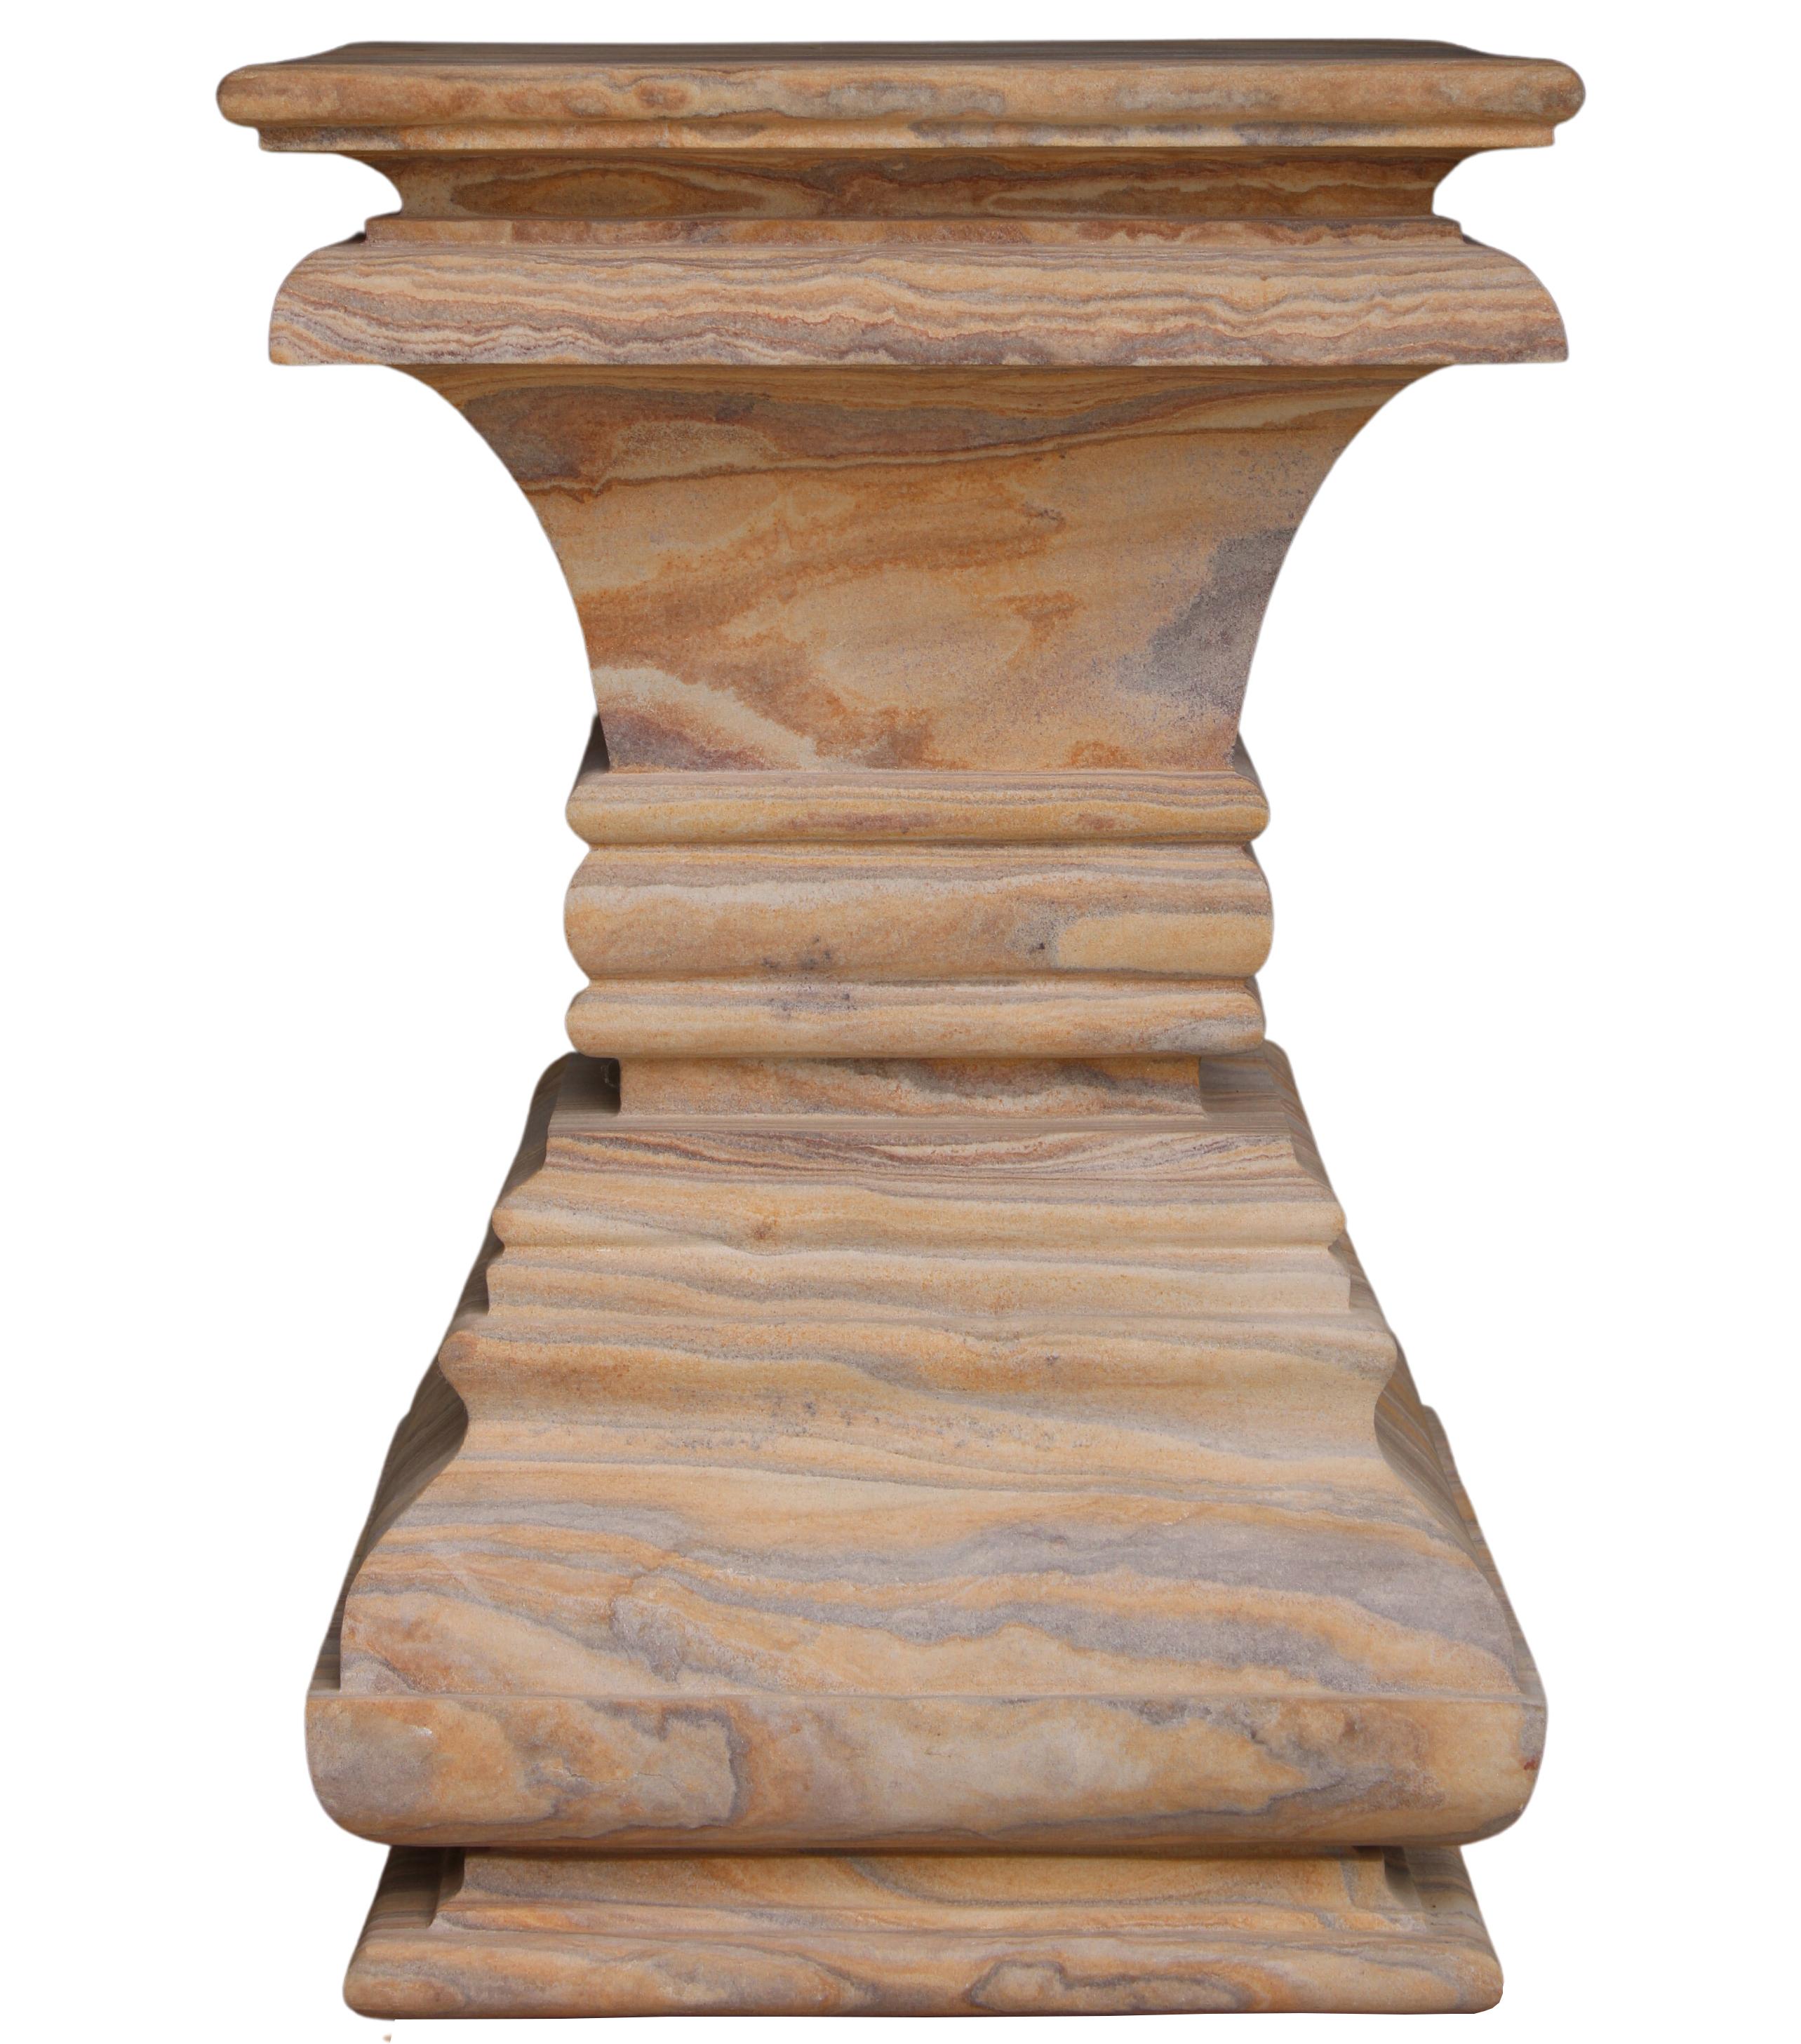 Inspired by the column capitals of the Roman architectural style, this pedestal is a statement piece. A sculpture pedestal, a side table, or a garden element, this versatile piece can fit wherever you like.

Square Architectural Pedestal Side